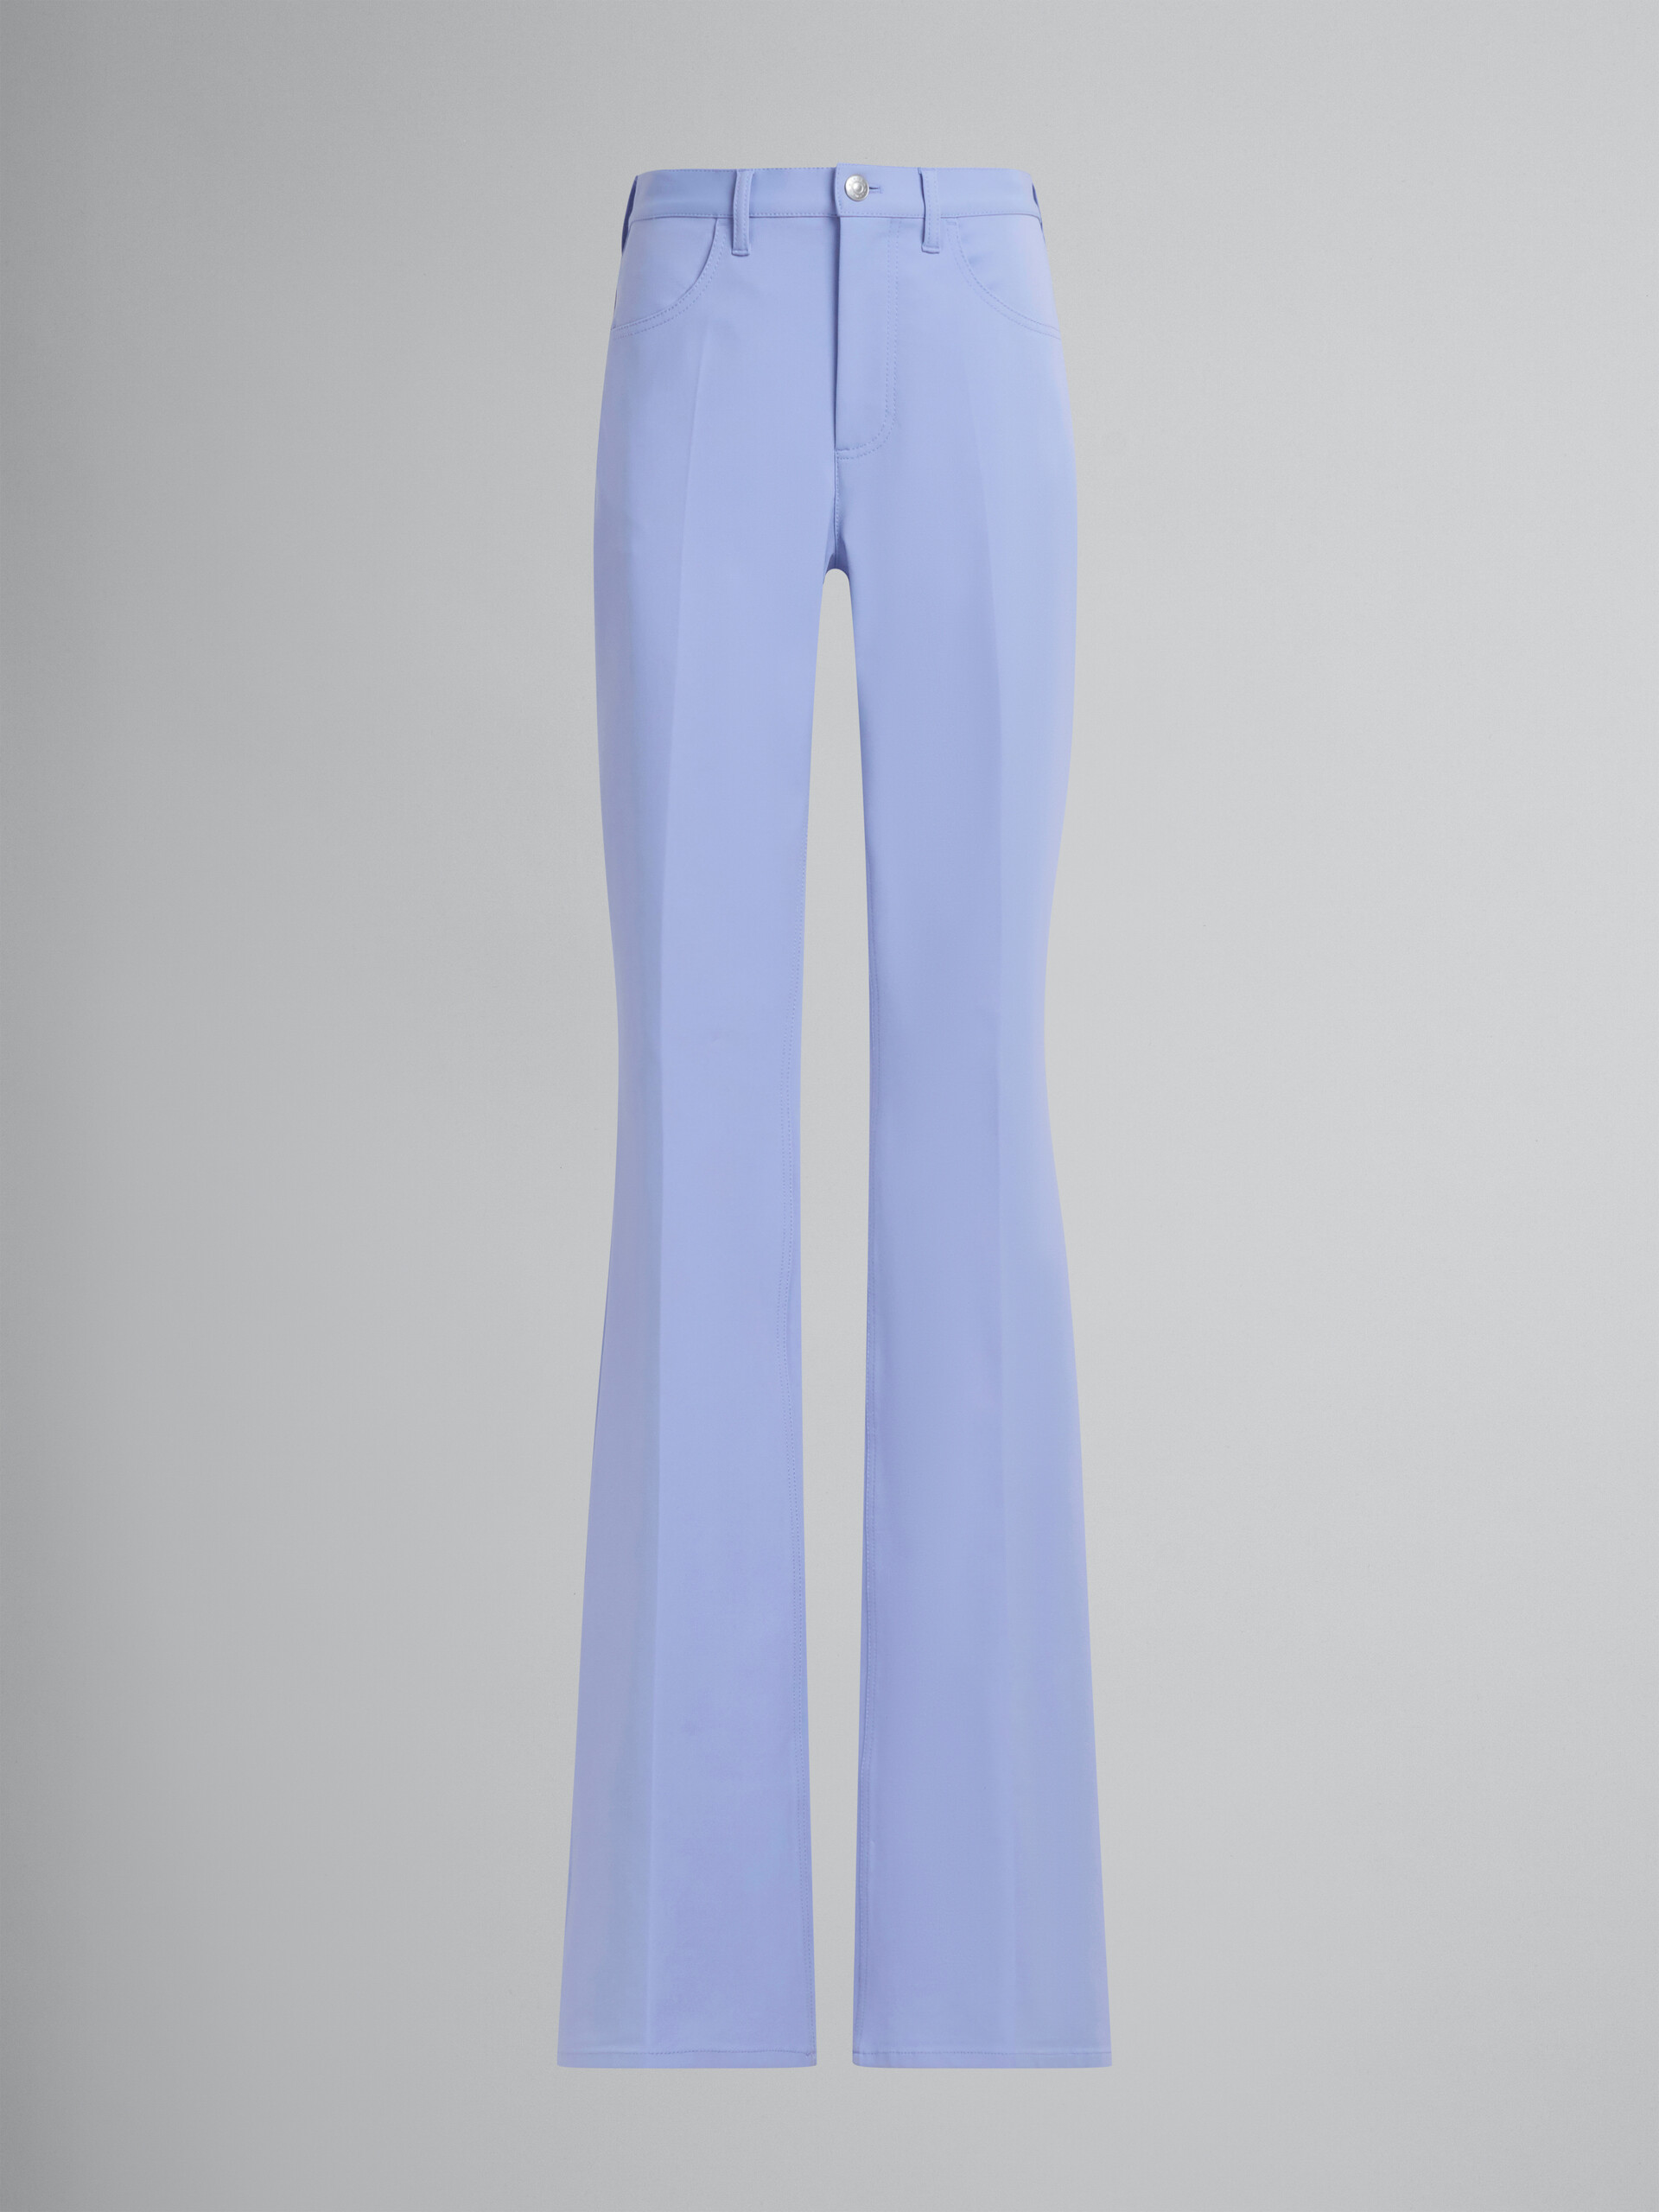 Lilac flared jersey trousers - Pants - Image 1